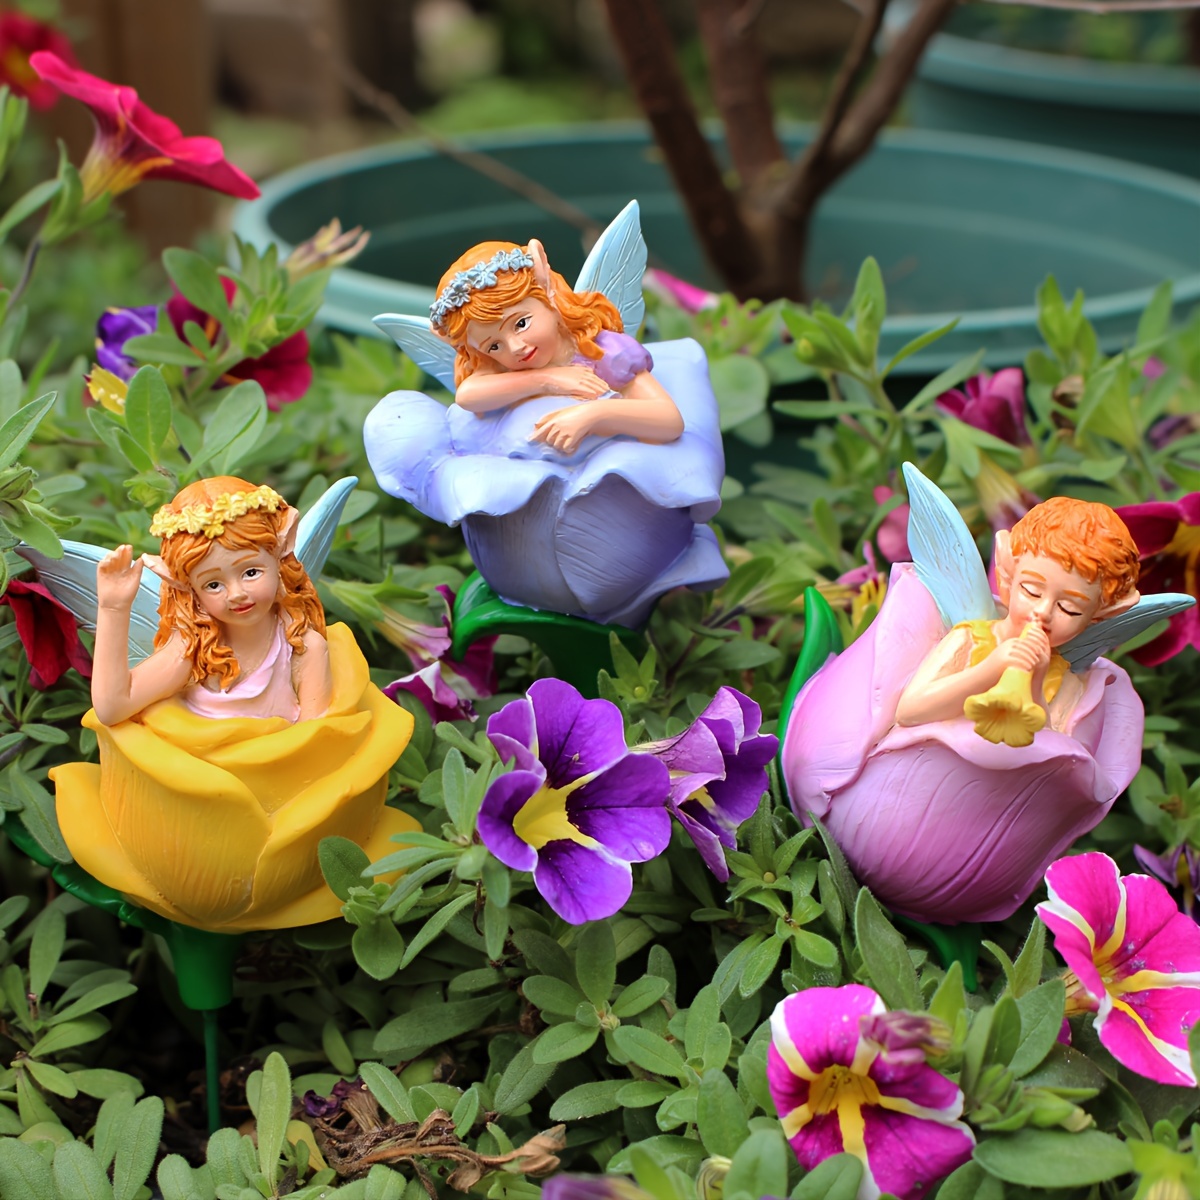 

3pcs Miniature Fairy Flower Bud Figurines Set, Enchanting Resin Fairy Garden Ornaments, Whimsical Indoor & Outdoor Decorative Art, Fantasy Characters For Home & Landscape Decoration